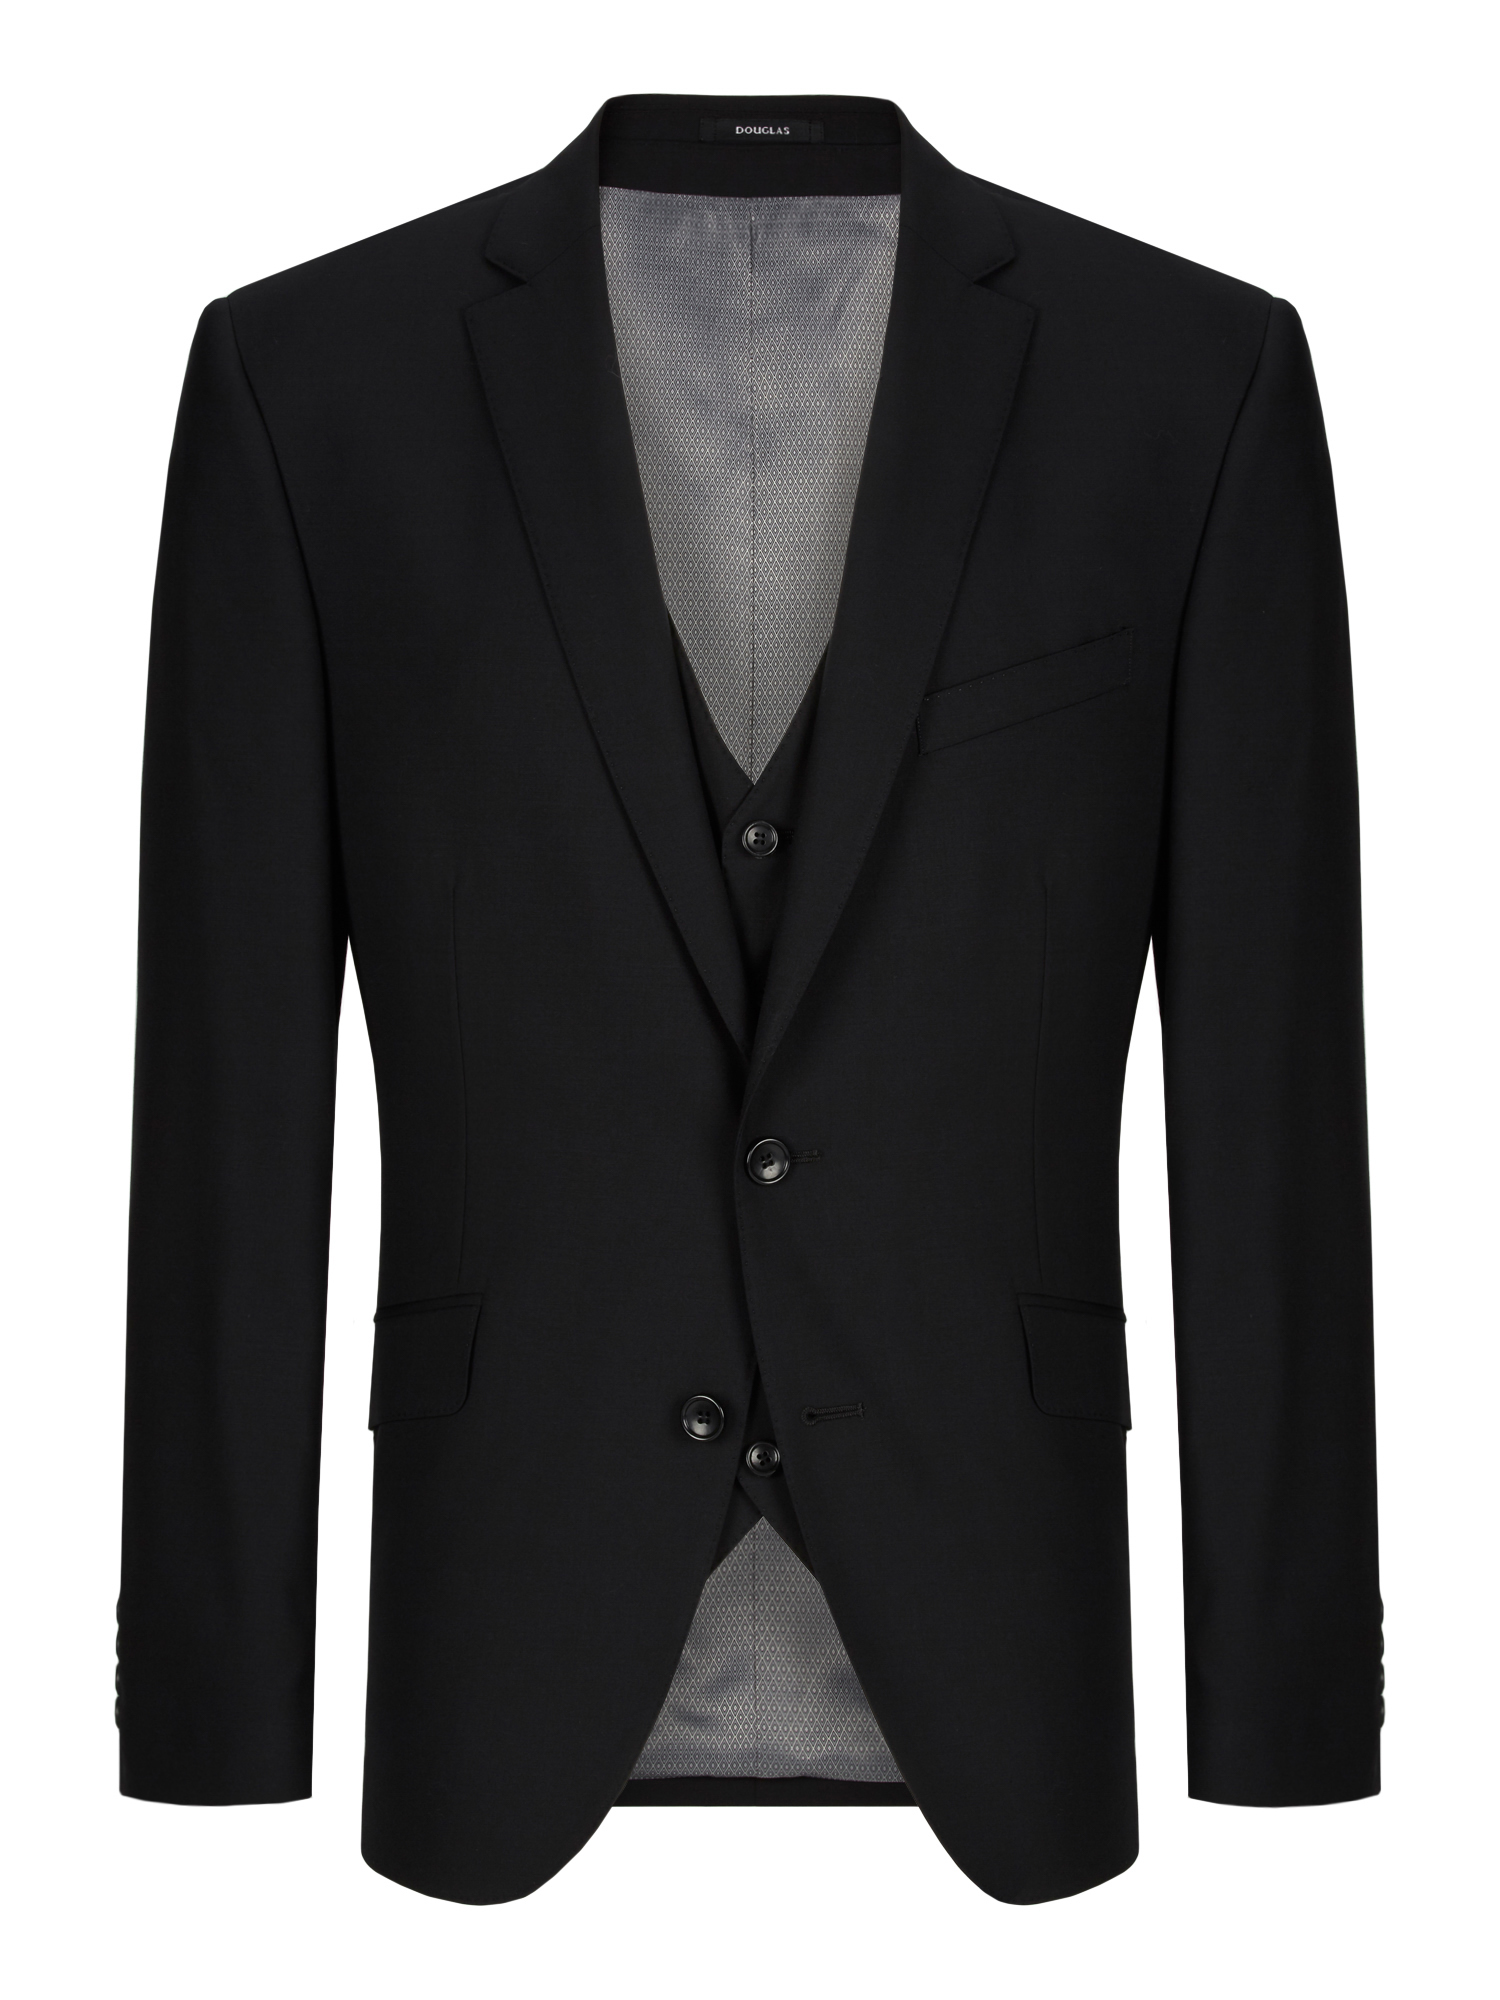 Funeral Attire For Men: Everything You Need To Mourn In Style